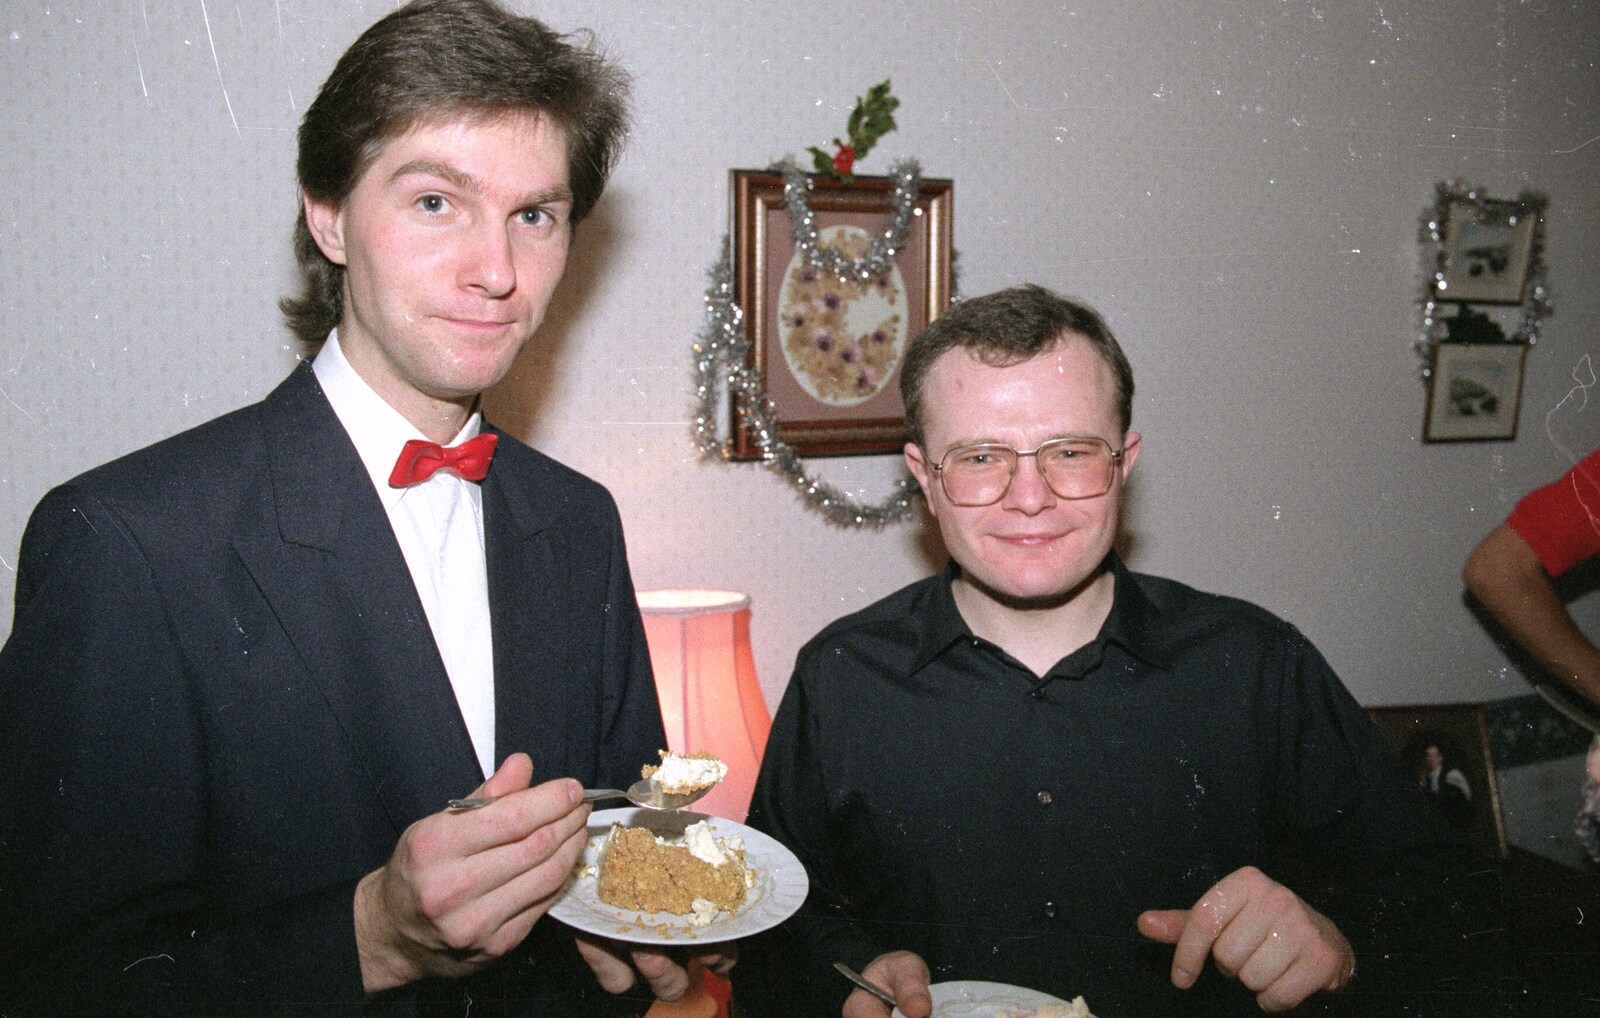 Sean, Hamish and some cheesecake from New Year's Eve at Phil's, Hordle, Hampshire - 31st December 1990